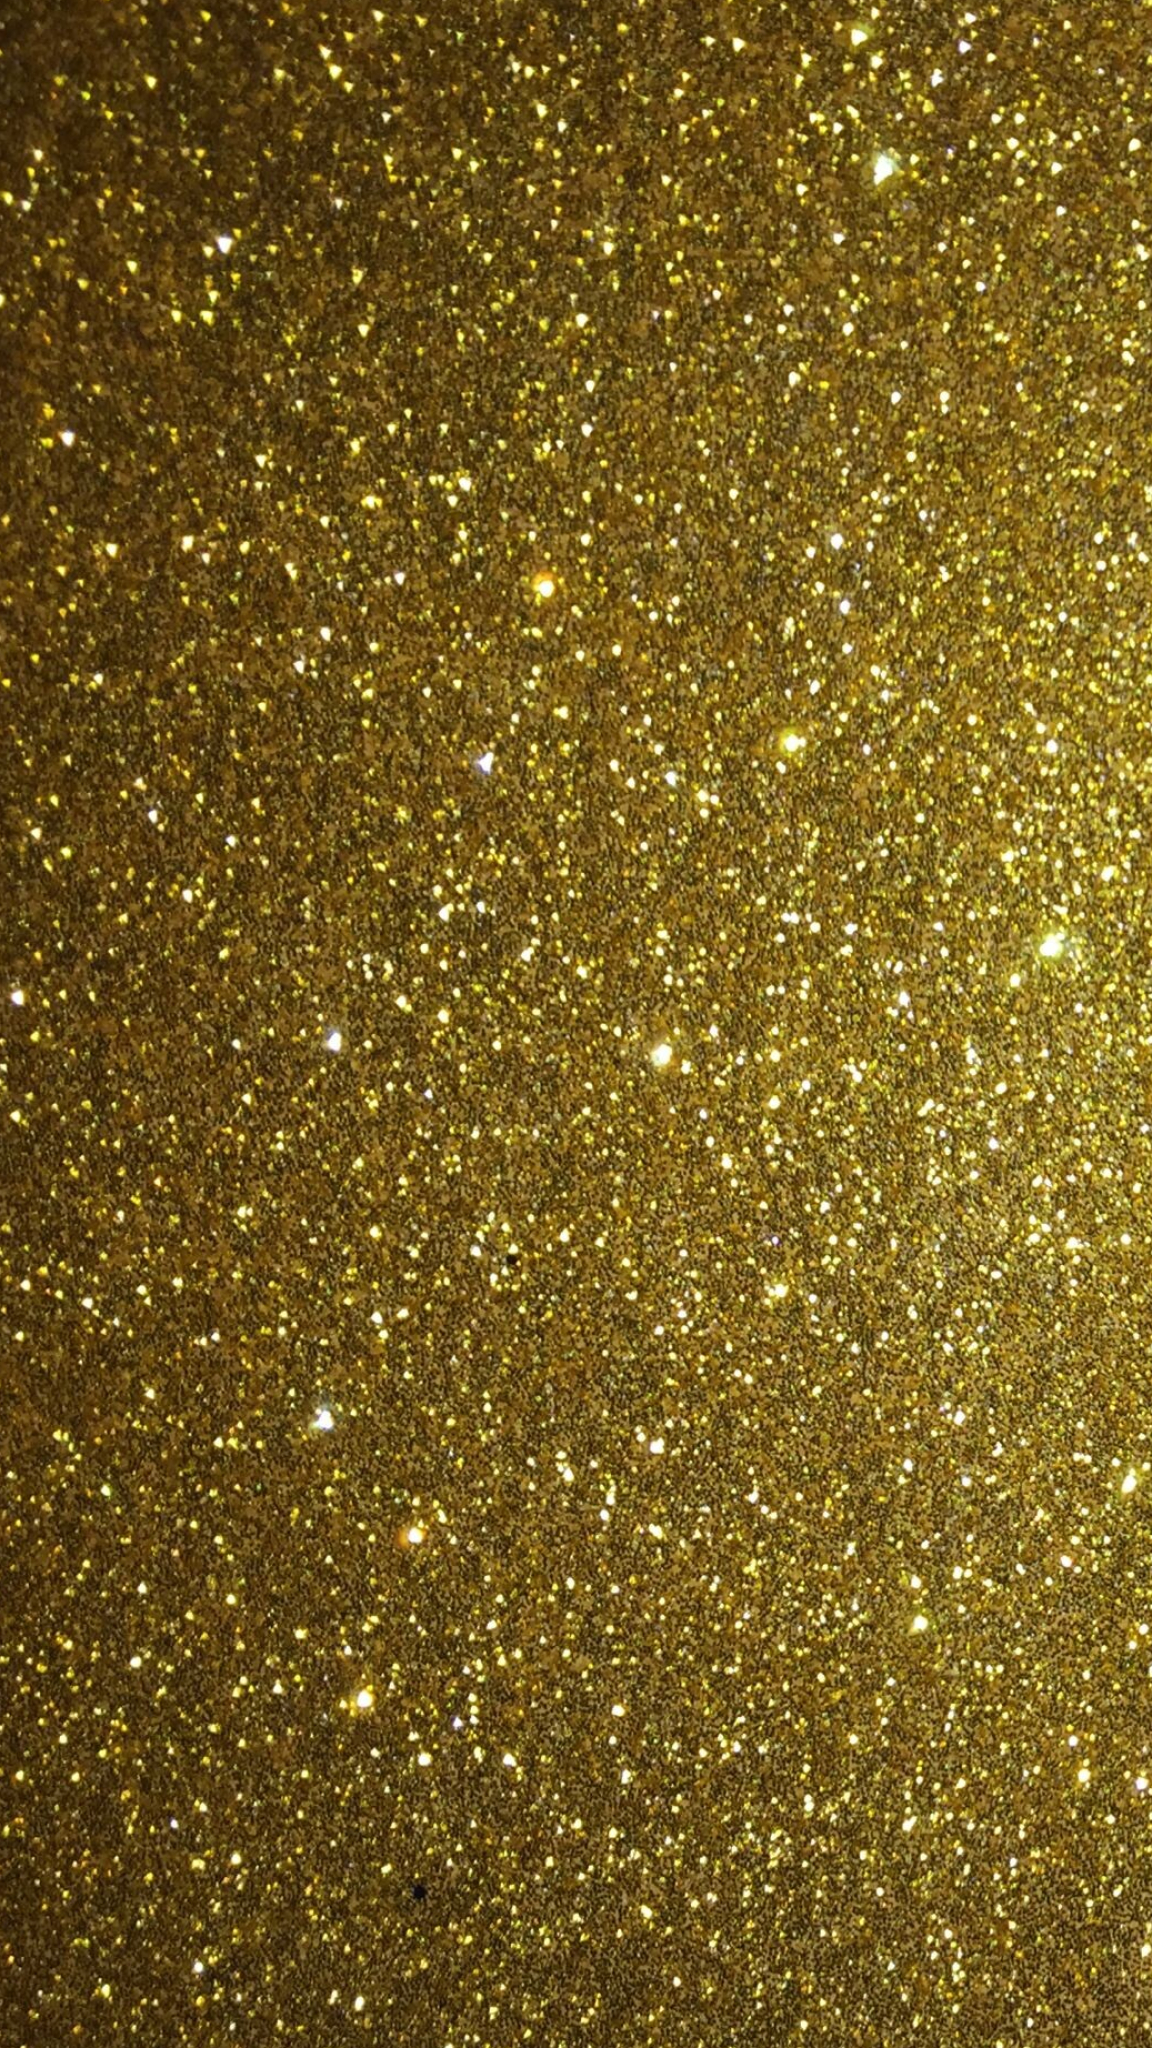 Gold Glitter: Golden particles reflect light at different angles, causing the surface to sparkle or shimmer. 1160x2050 HD Wallpaper.